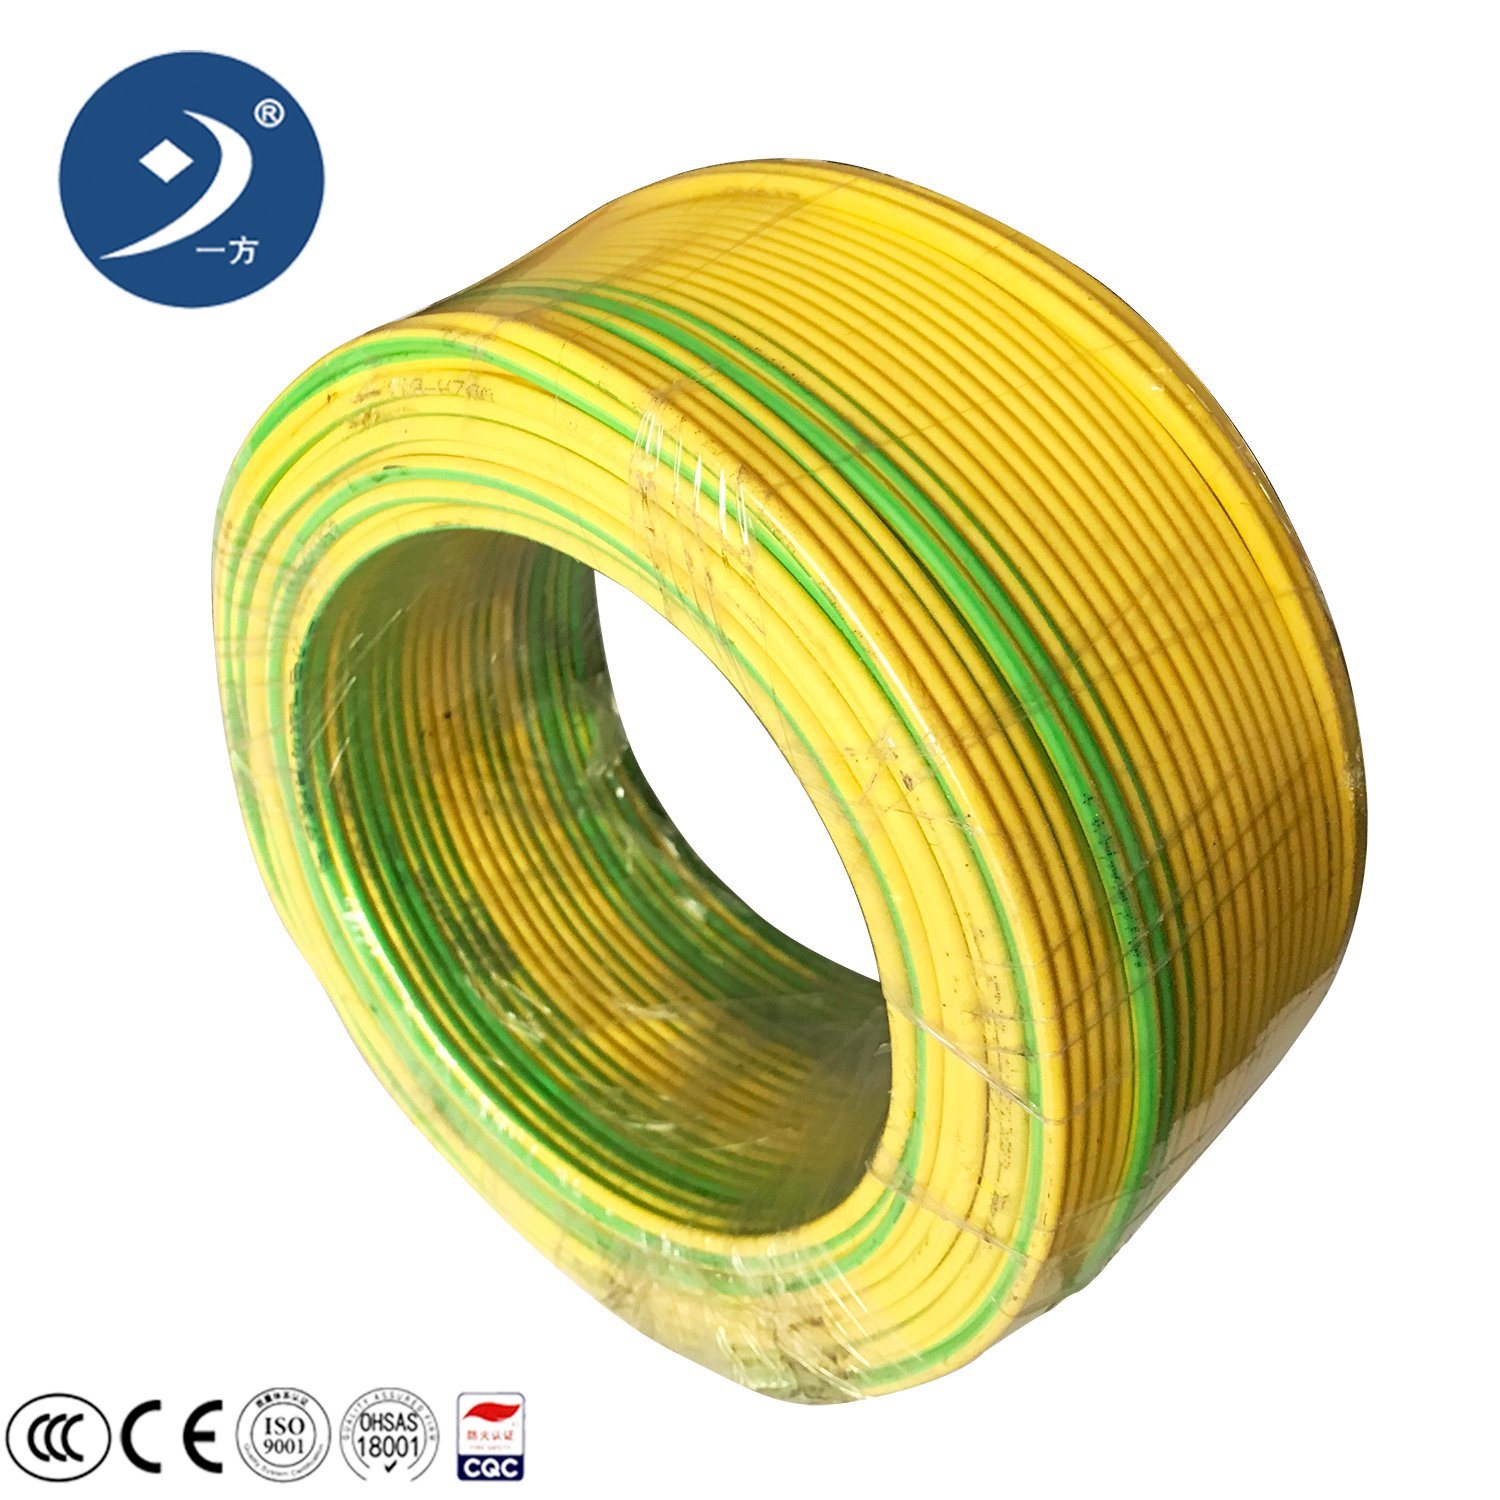 Solid Stranded Multi Strand Building Wire Flexible Copper Housing Wire